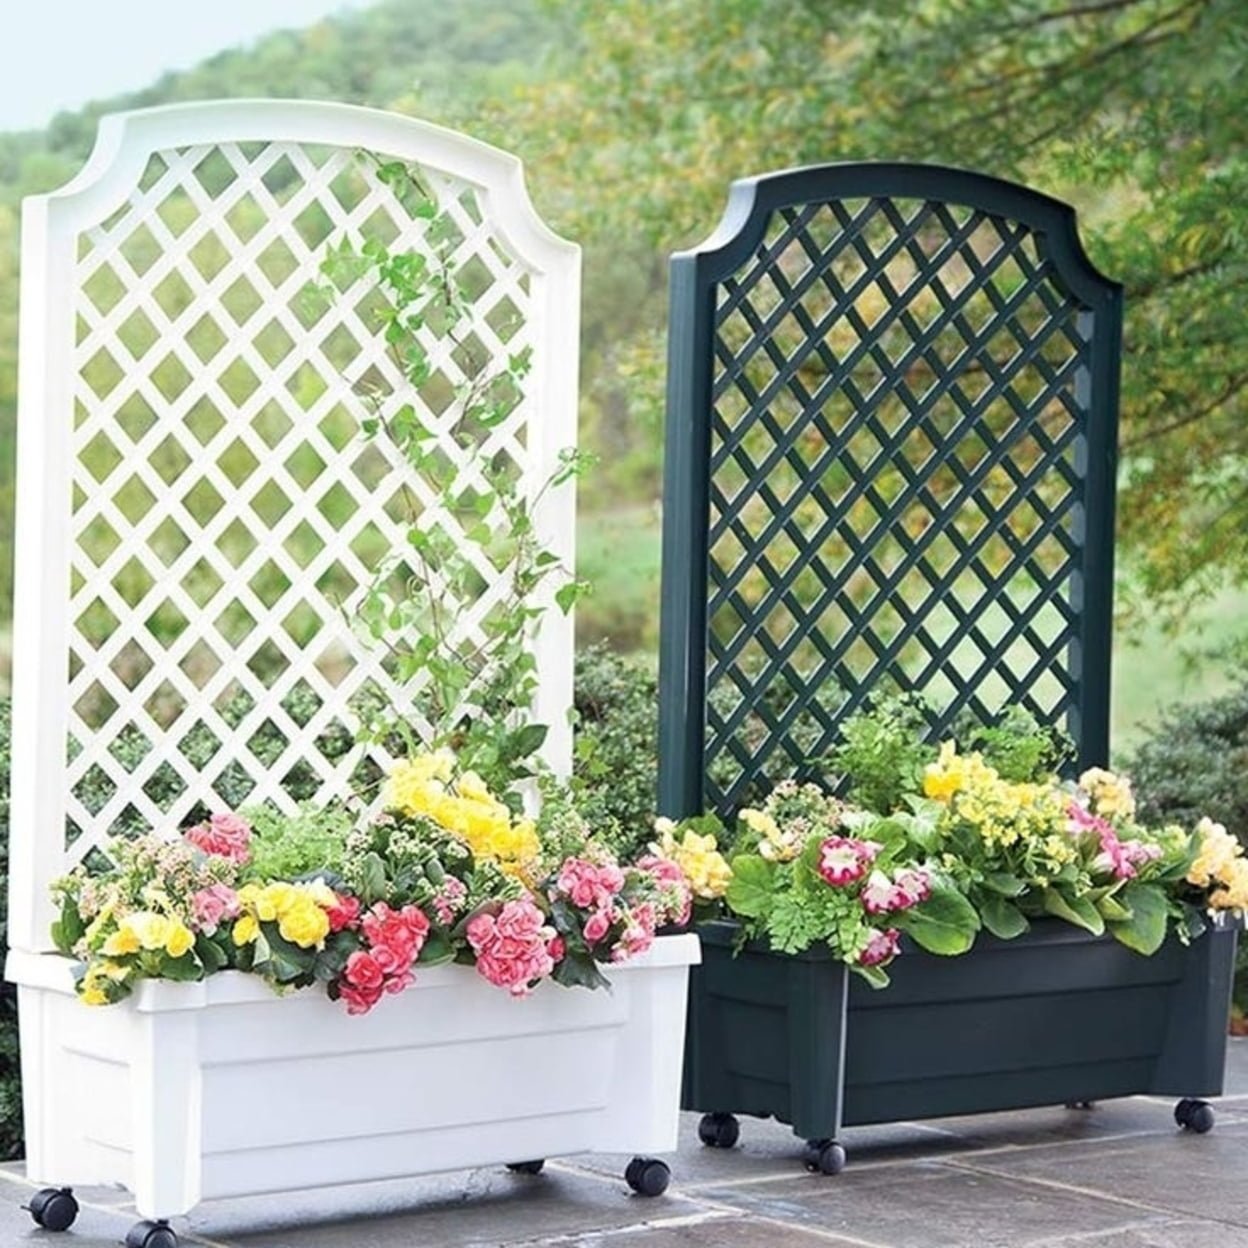 Picture of Bamboo54 5312 Trellis Screen with Planter Base